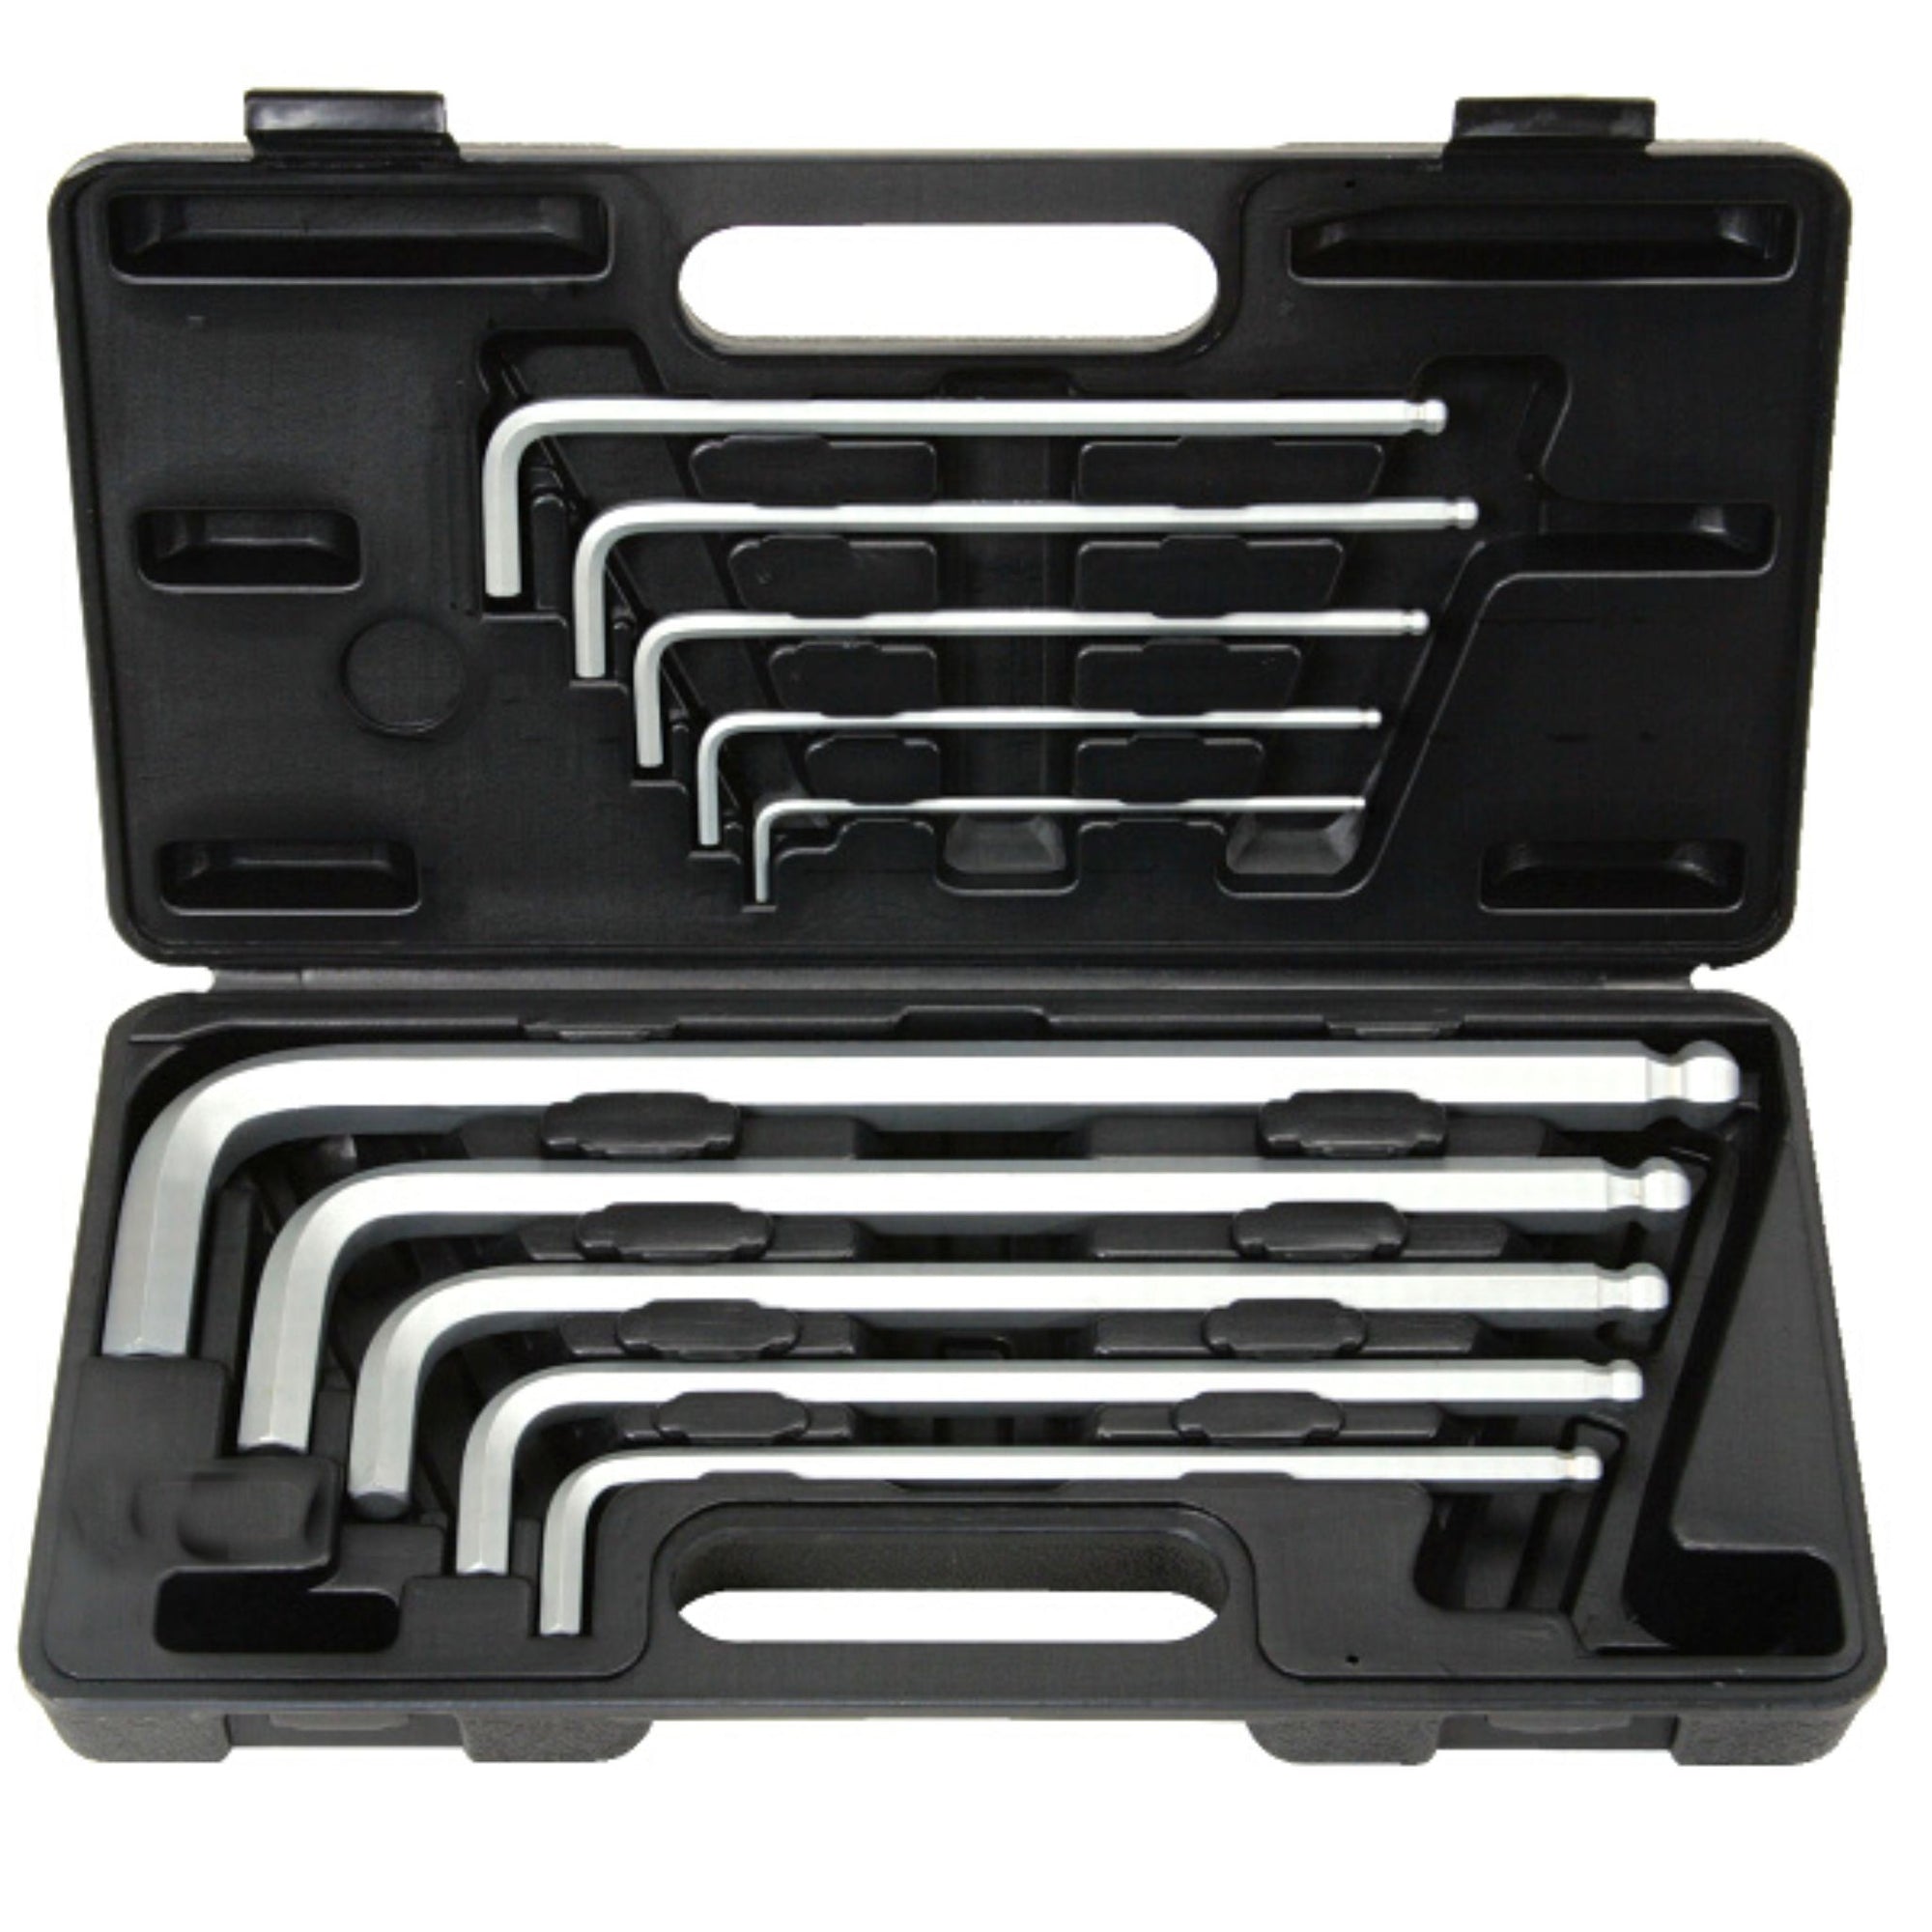 10 Piece Long Arm Metric Ball End Hex-Key Set (3-17mm) - South East Clearance Centre